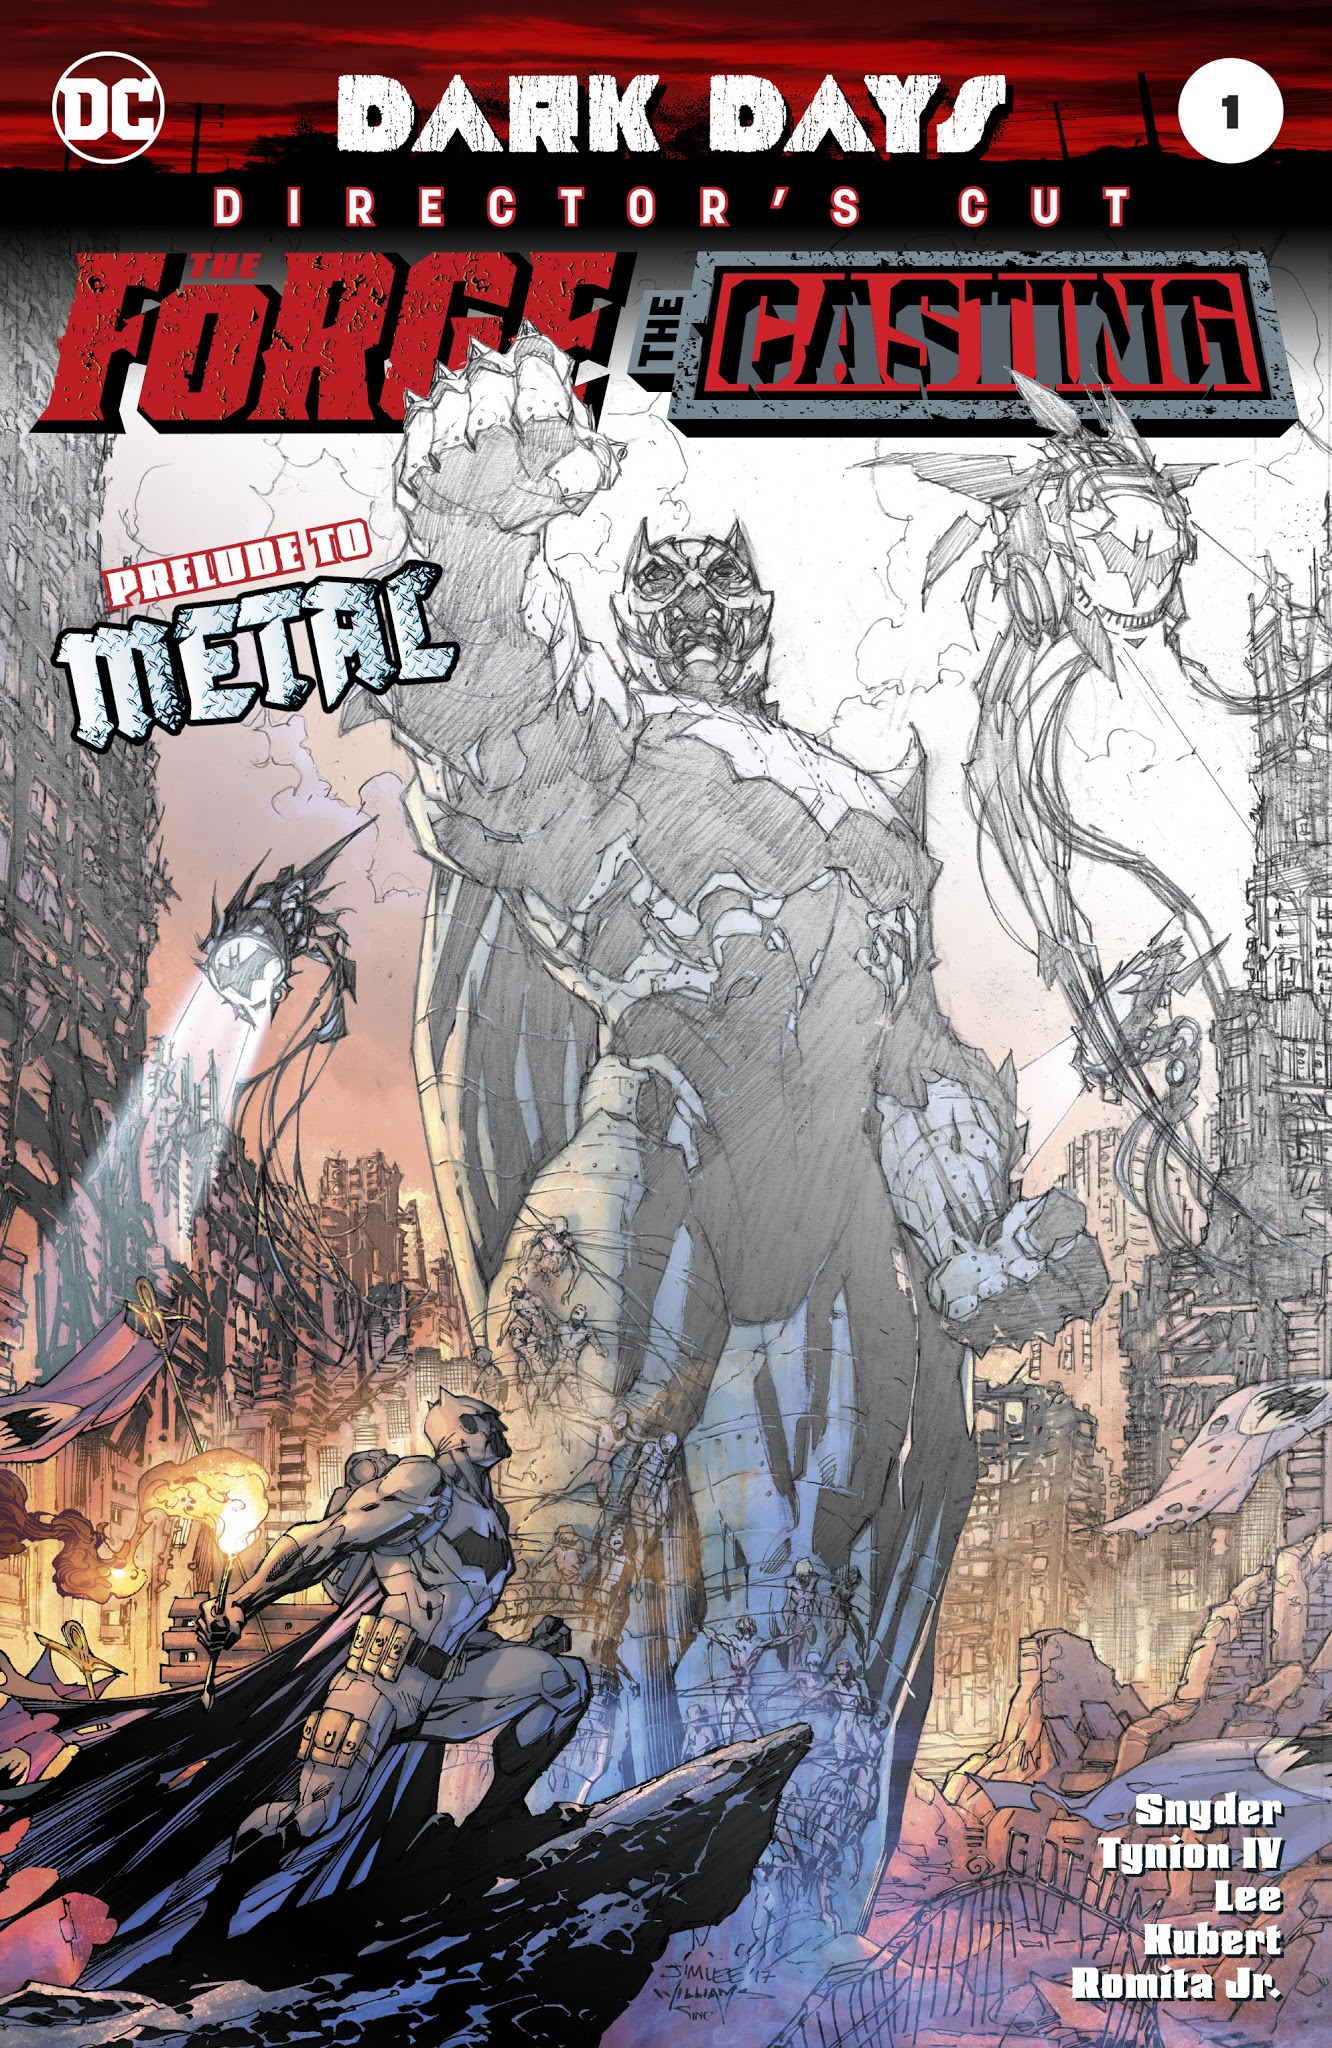 Read online Dark Days: The Forge/Casting Director's Cut comic -  Issue # Full - 1